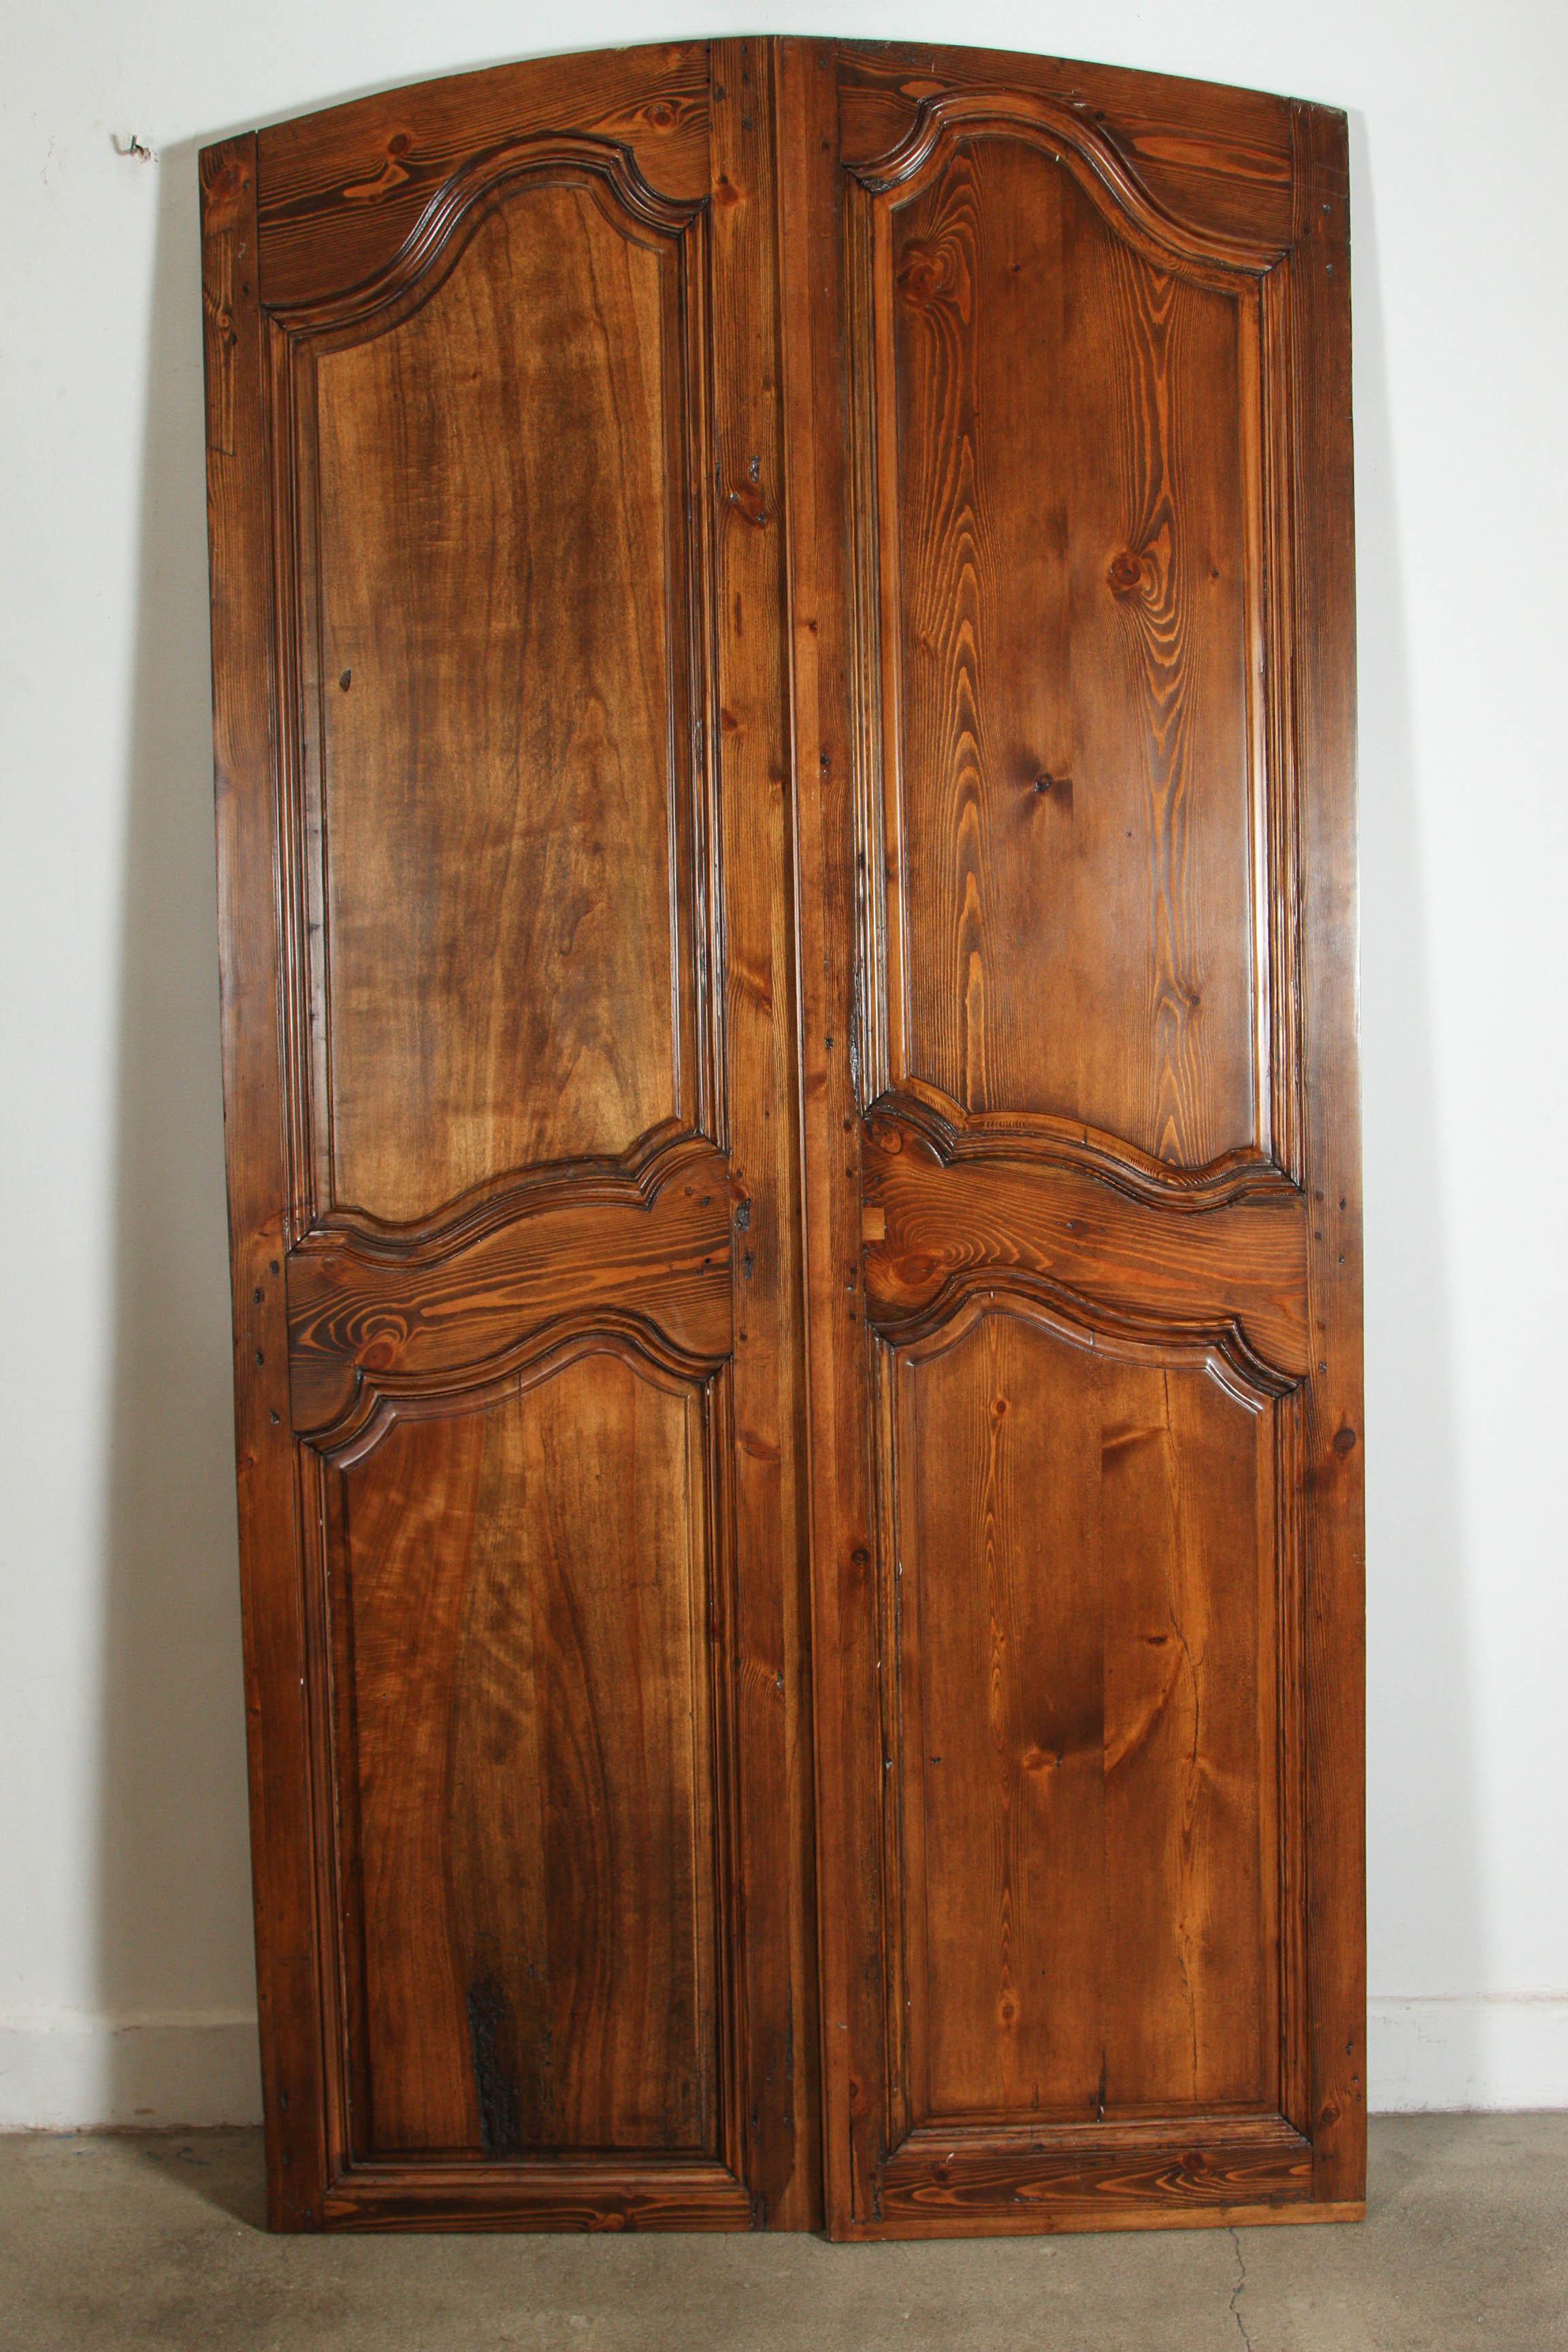 Pair of French Provincial doors, could be use for a closet or indoor doors.
Set of doors sizes are as follow:
91